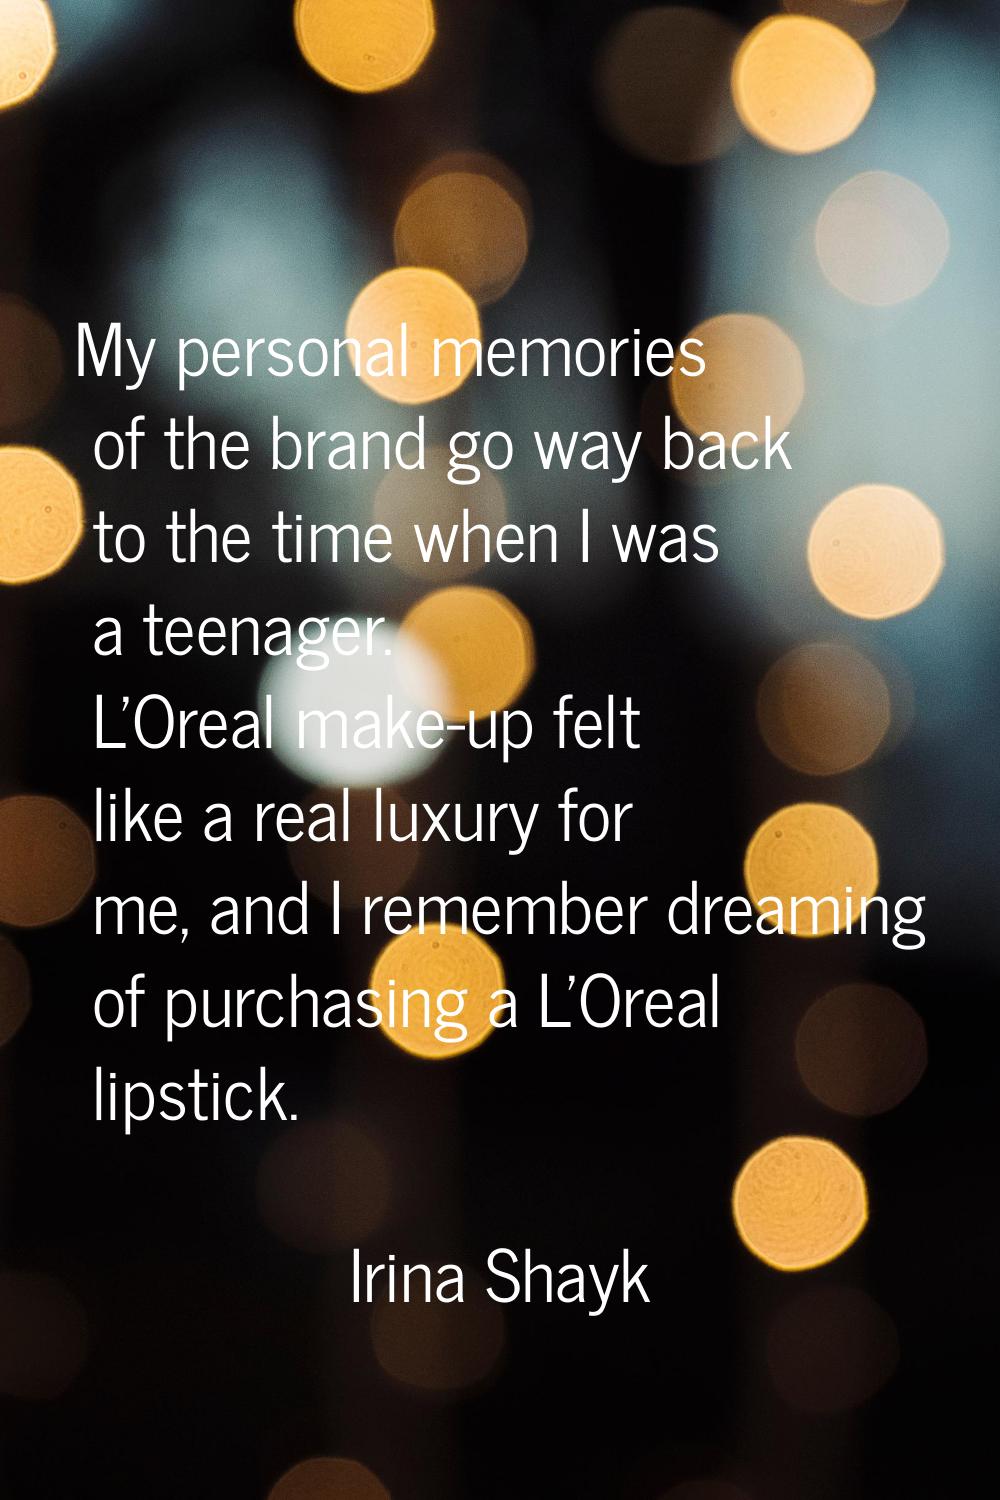 My personal memories of the brand go way back to the time when I was a teenager. L'Oreal make-up fe